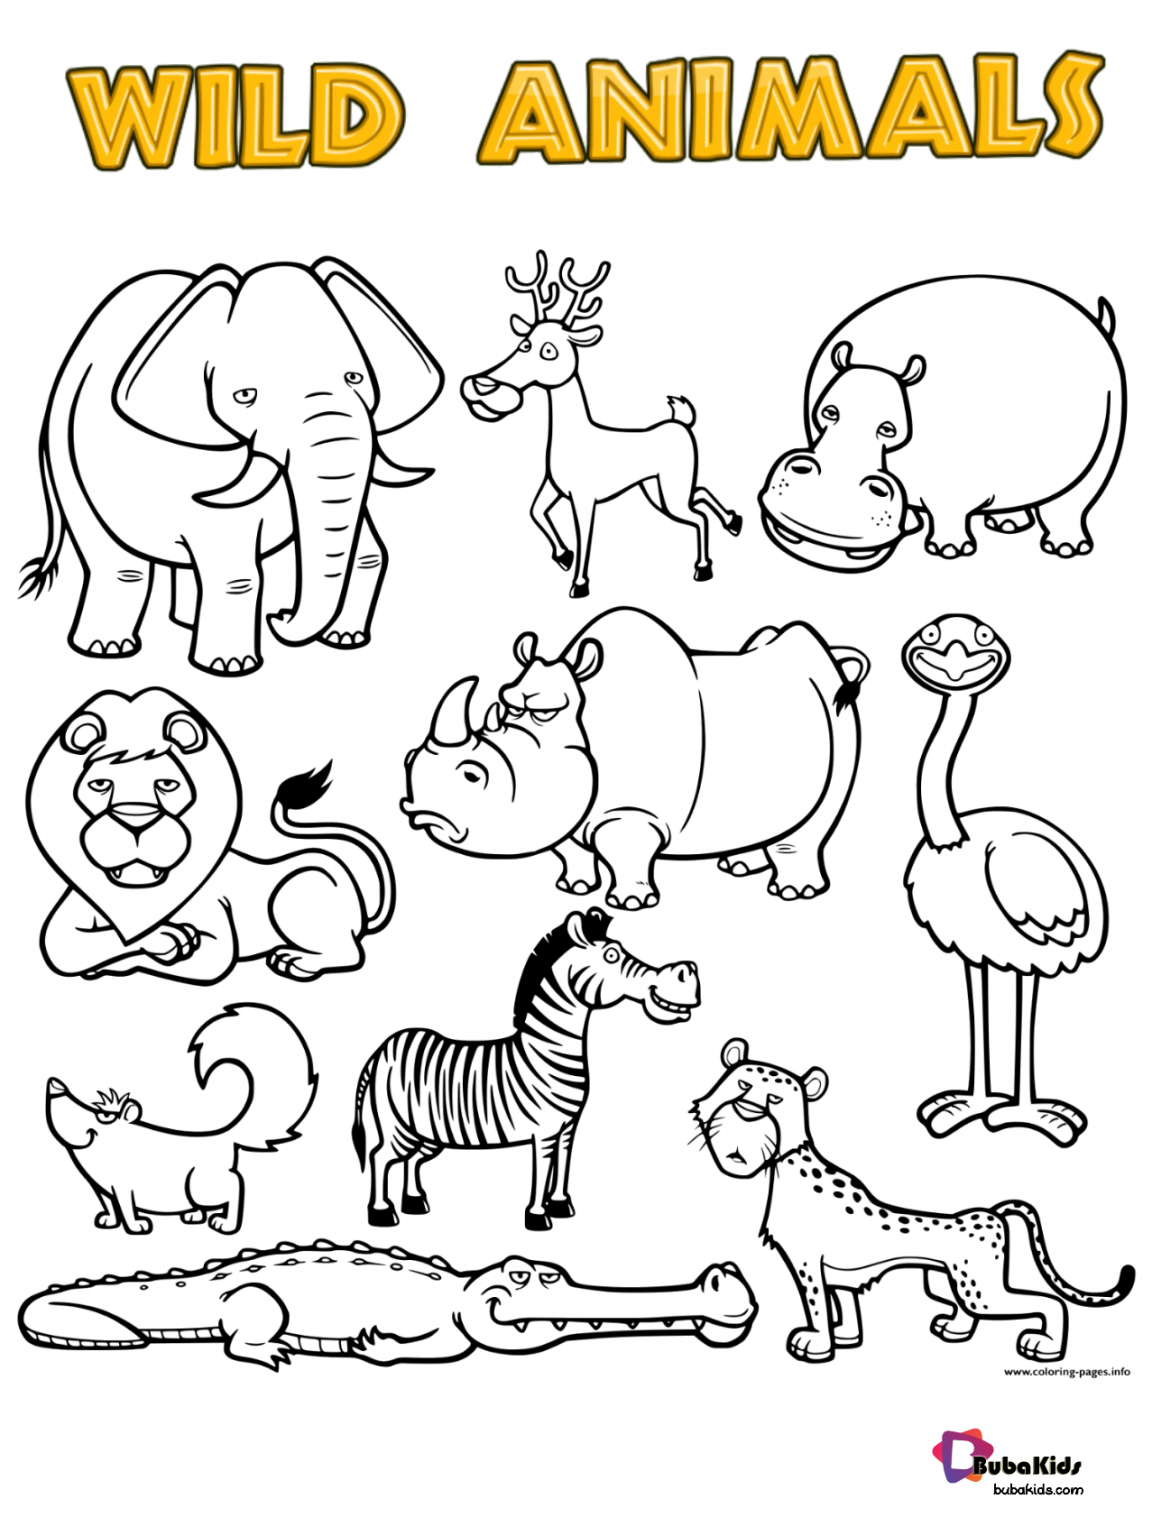 Cool Wild Animal Coloring Pages For Kids  The ultimate guide 